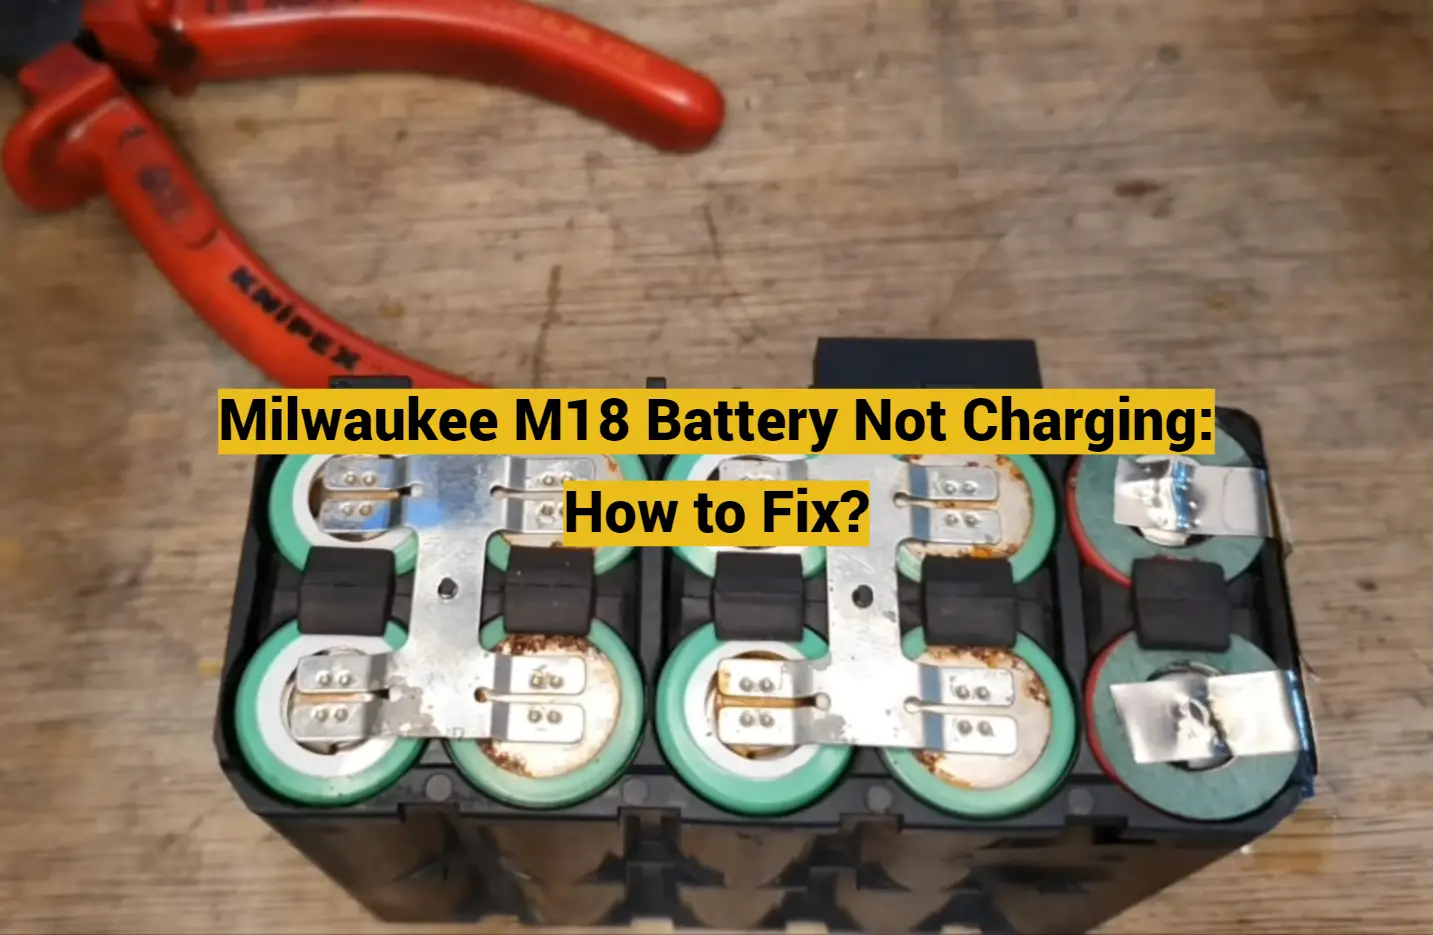 Milwaukee M18 Battery Not Charging: How to Fix?